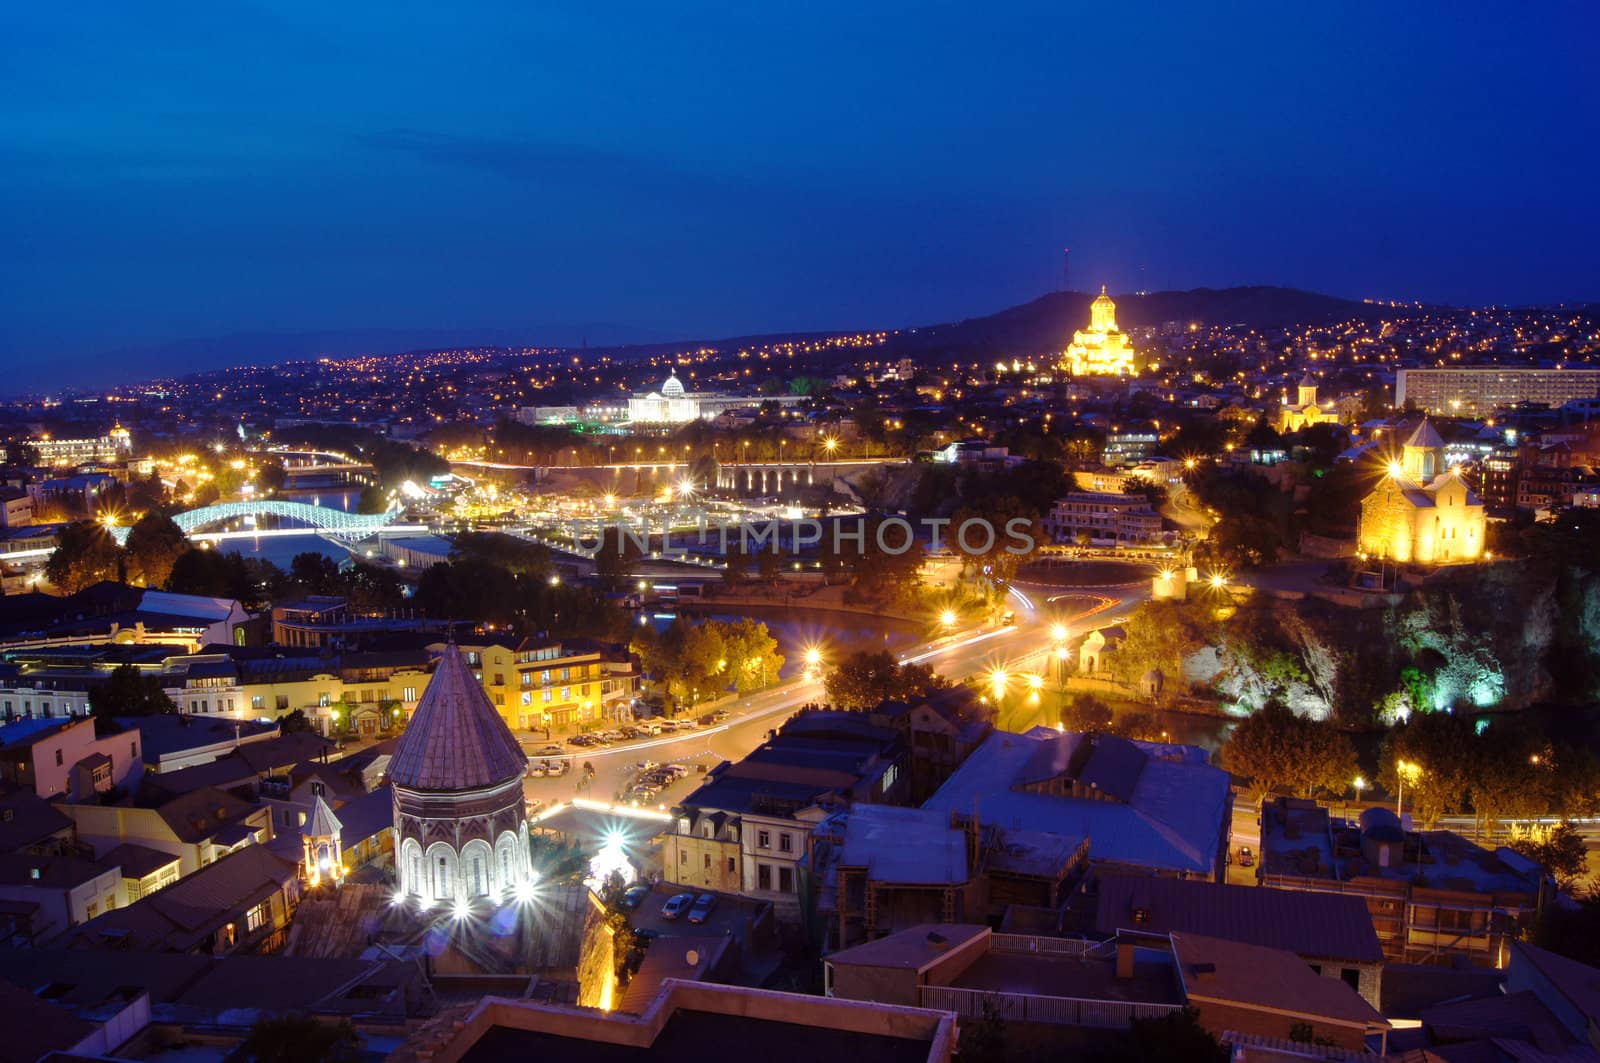 Night view of Tbilisi Old town with ancient churches, castle and president palace by Elet